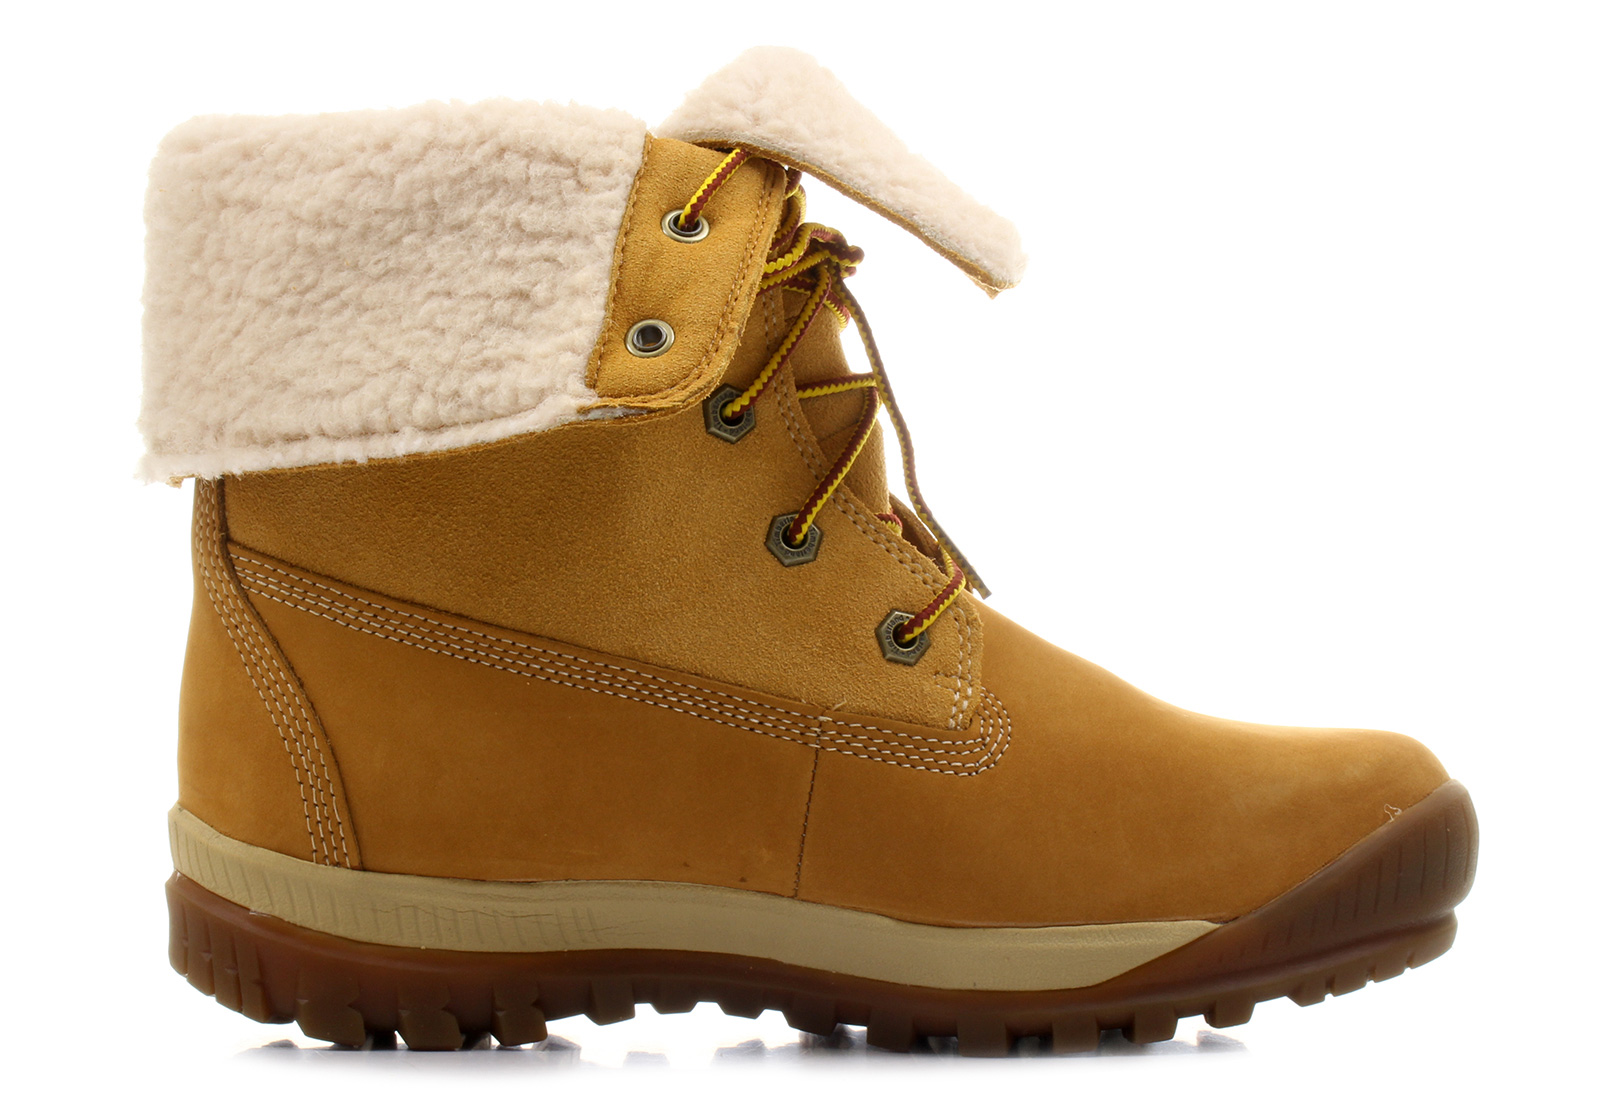 Timberland Boots - Woodhaven Fleece Roll Down - 8745b-whe - Online shop ...